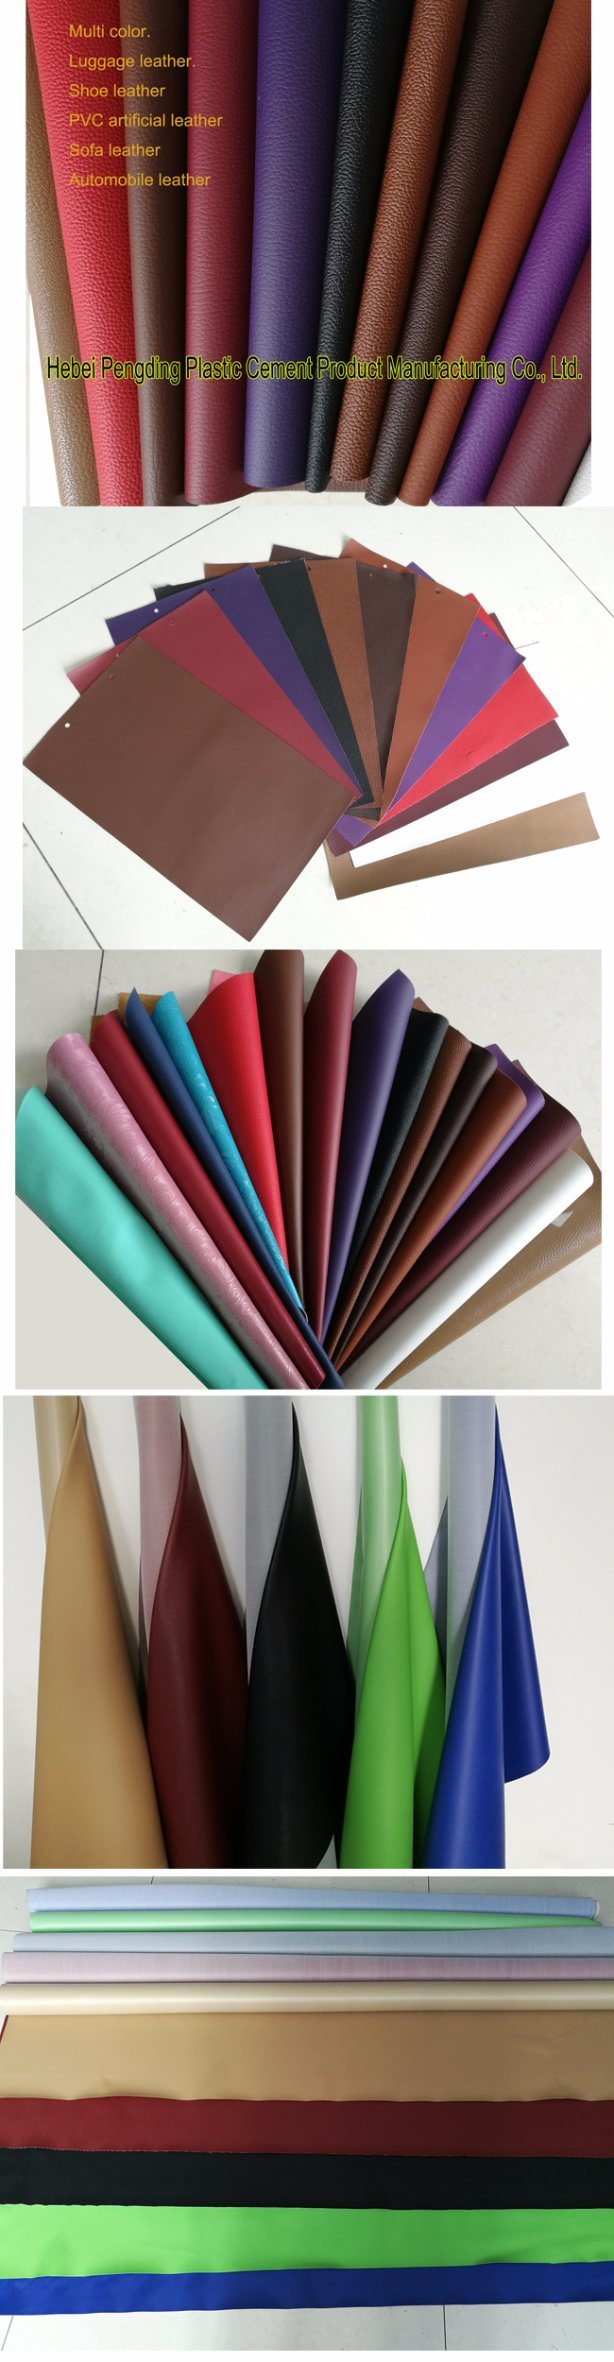 Customizable Thickness of Sofa Leather, Bag Leather, PVC Leather